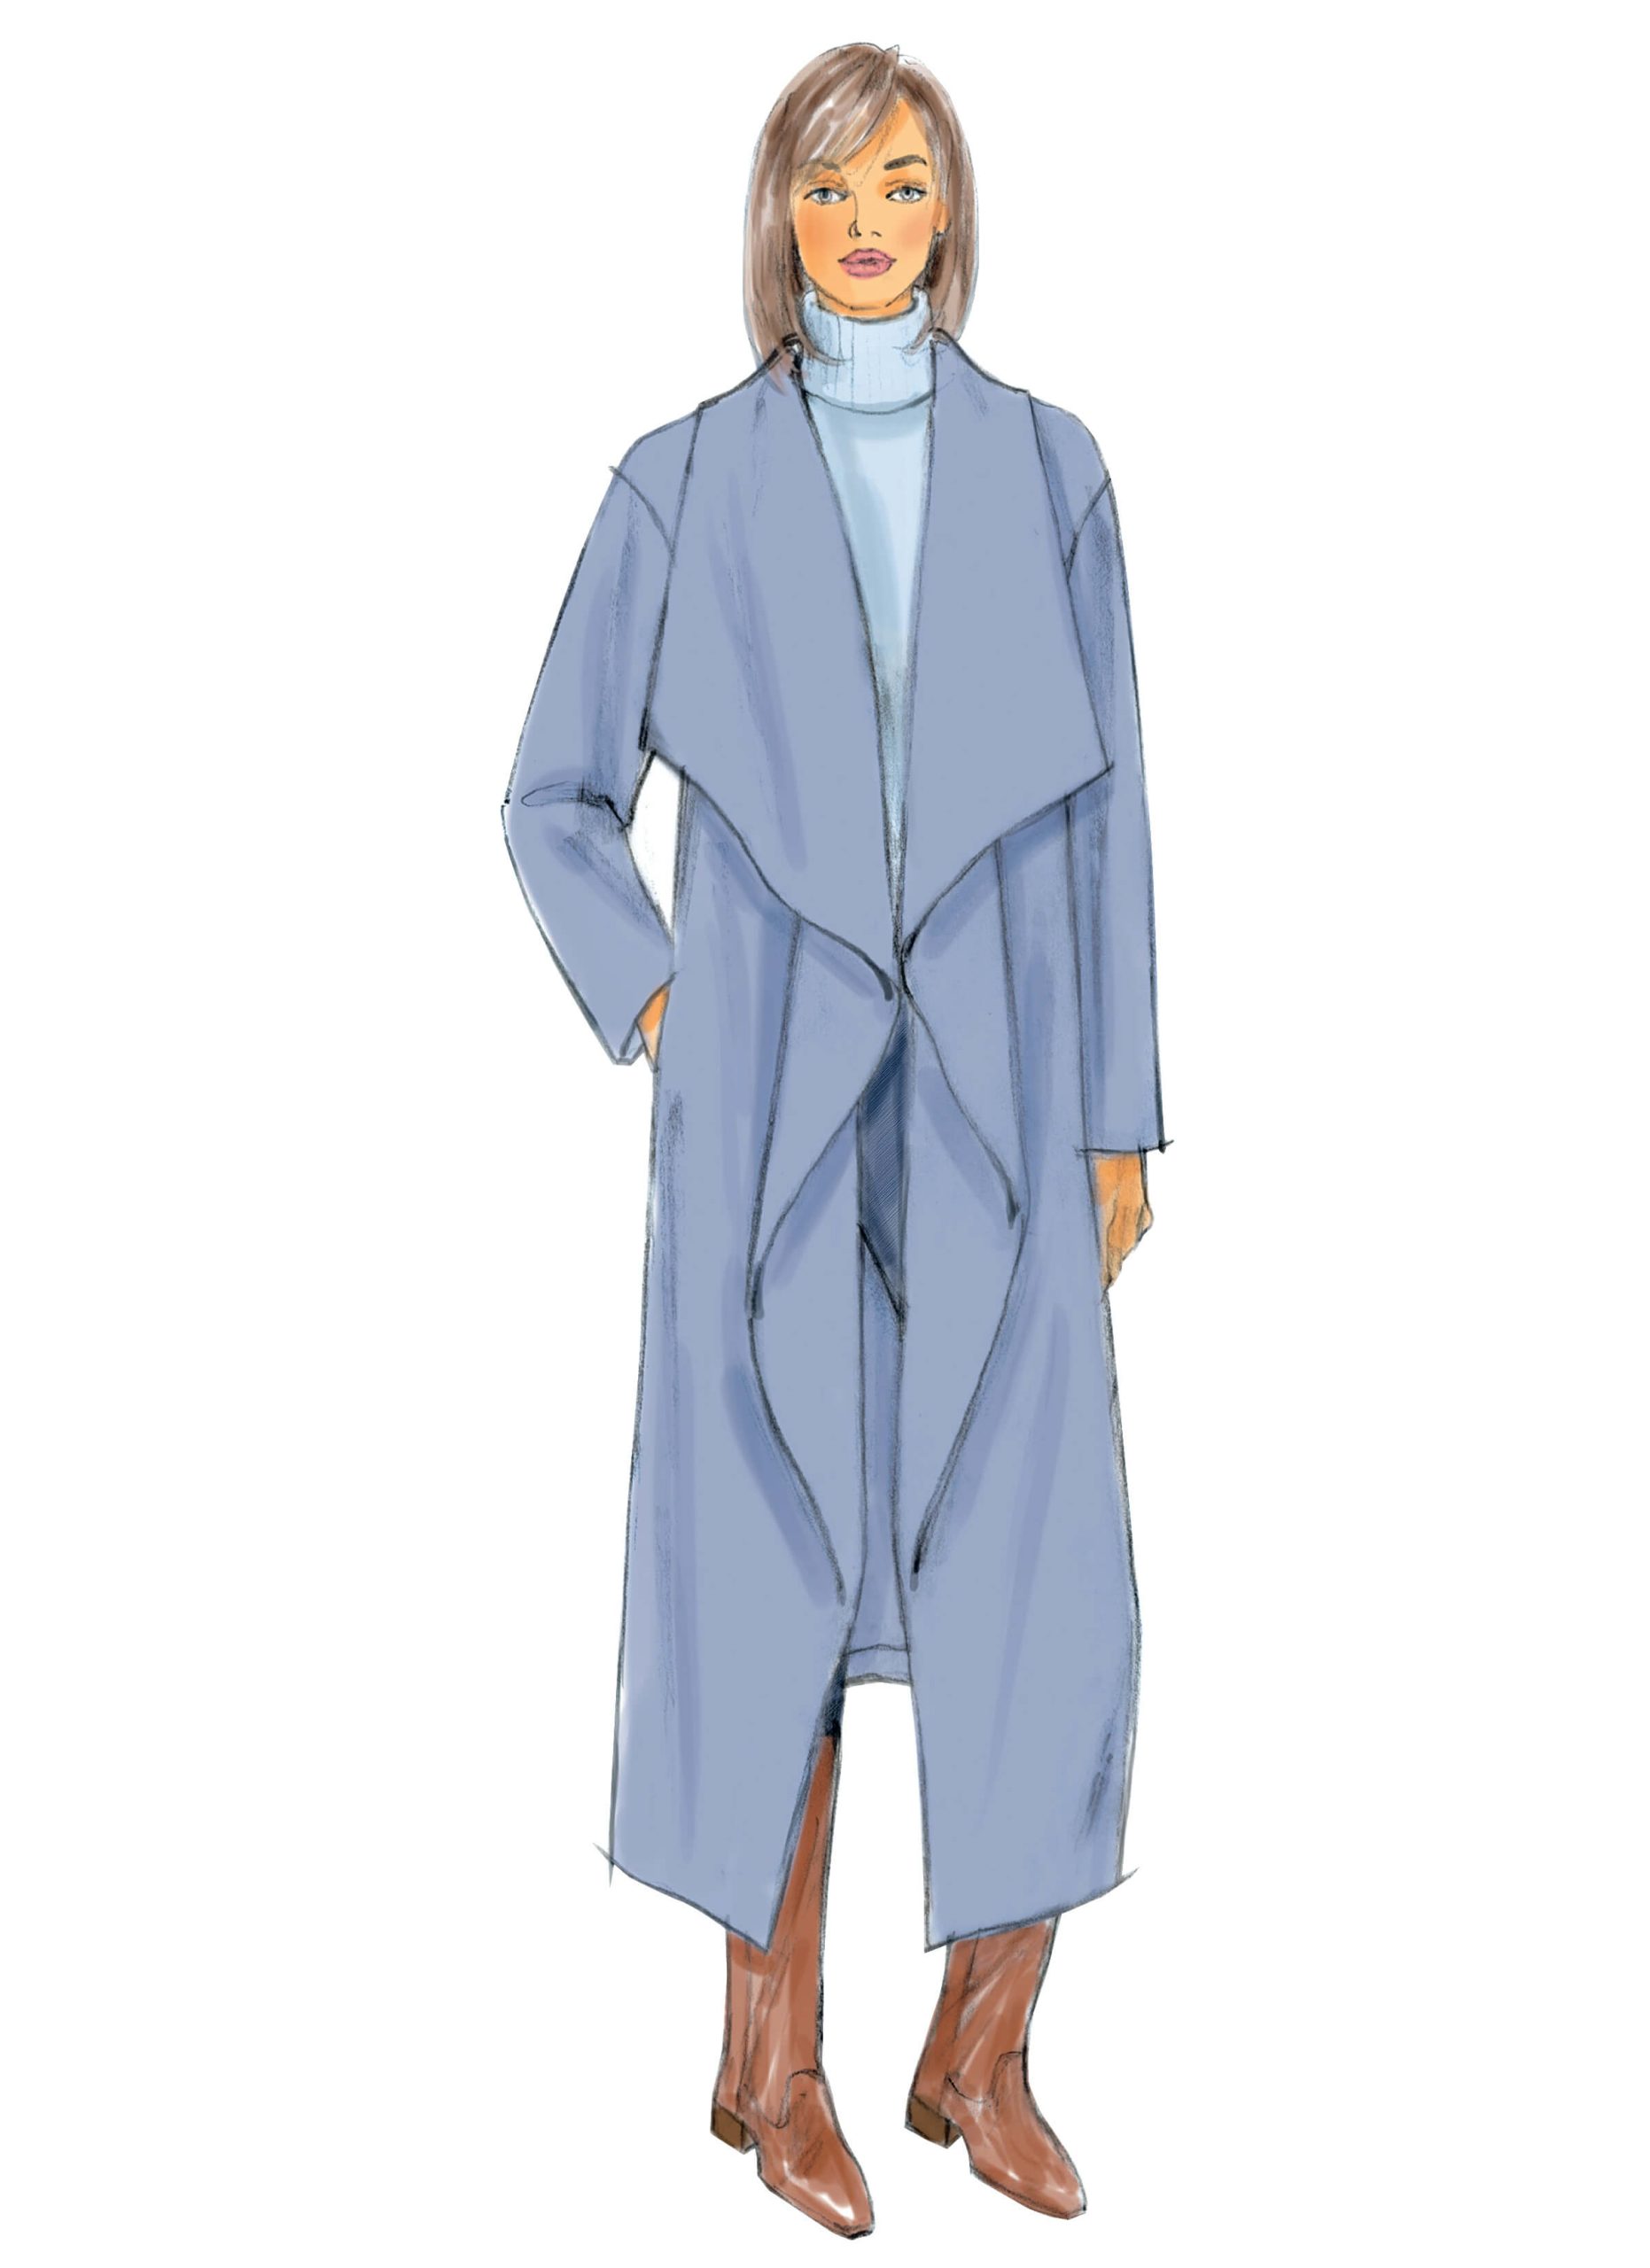 Butterick Sewing Pattern B6250 Misses' Jacket, Coat and Wrap